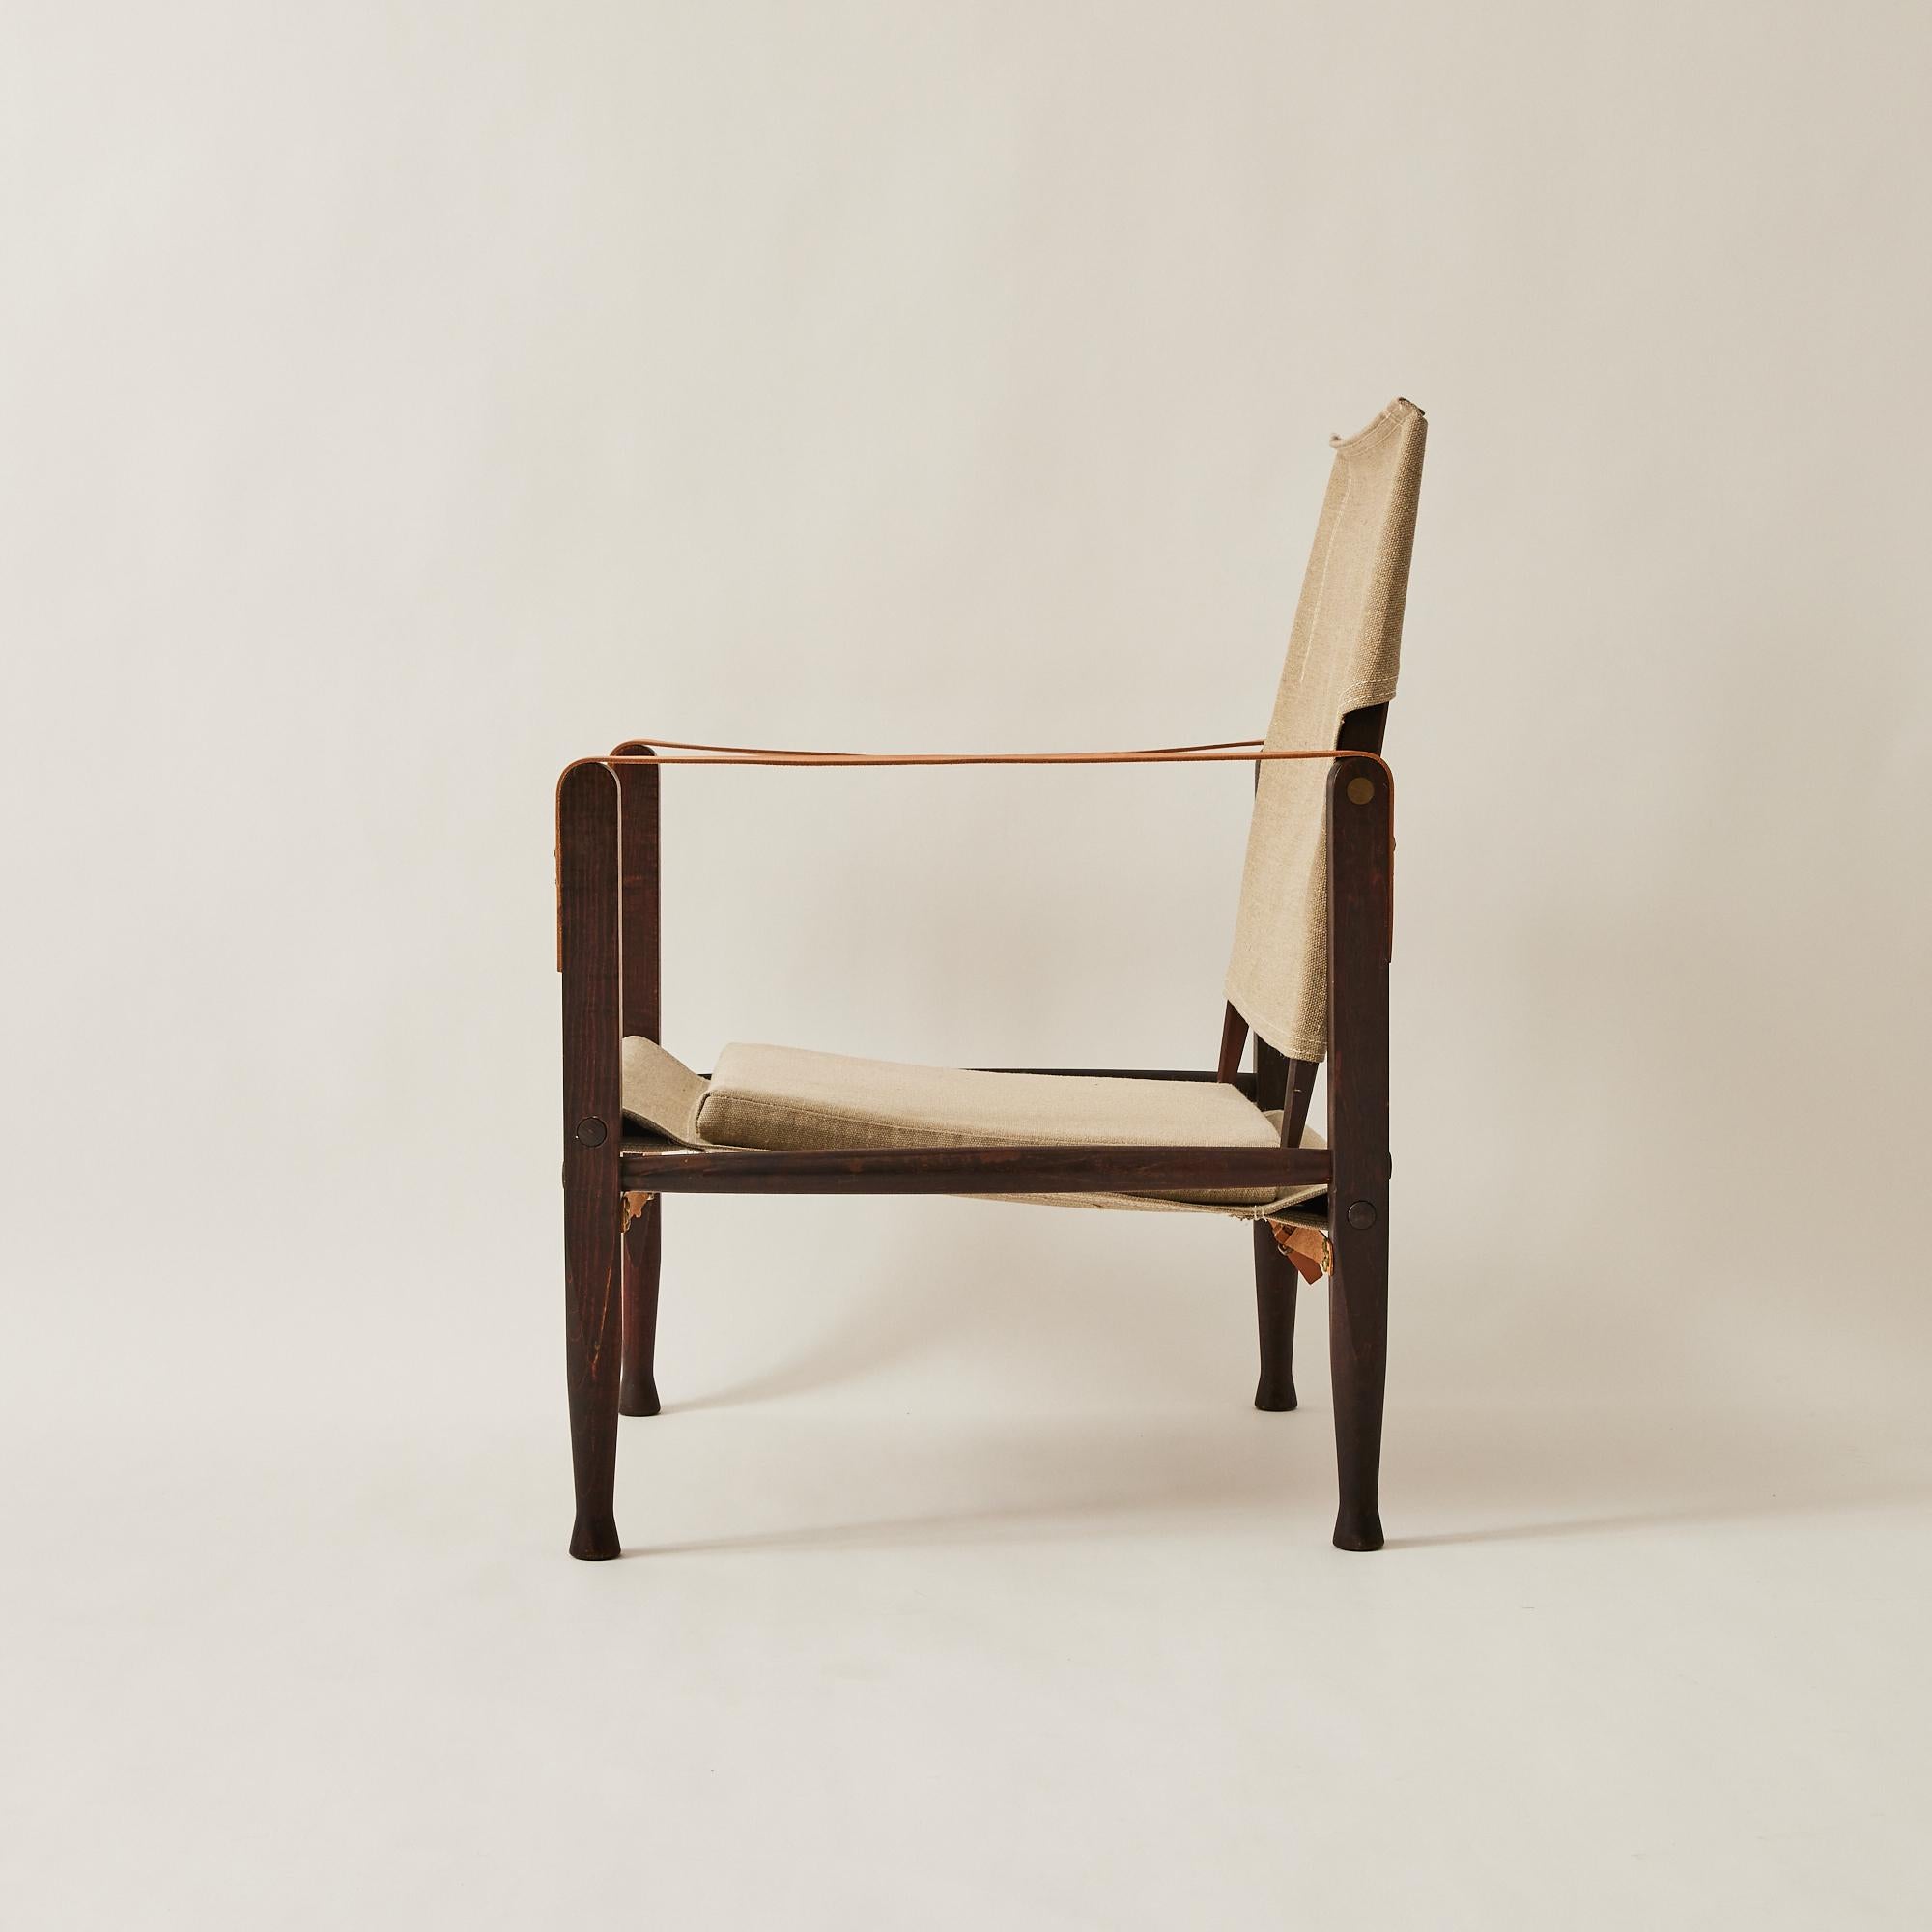 Danish Kaare Klint Safari Chairs for Rud Rasmussen in Ash and Canvas- a Pair For Sale